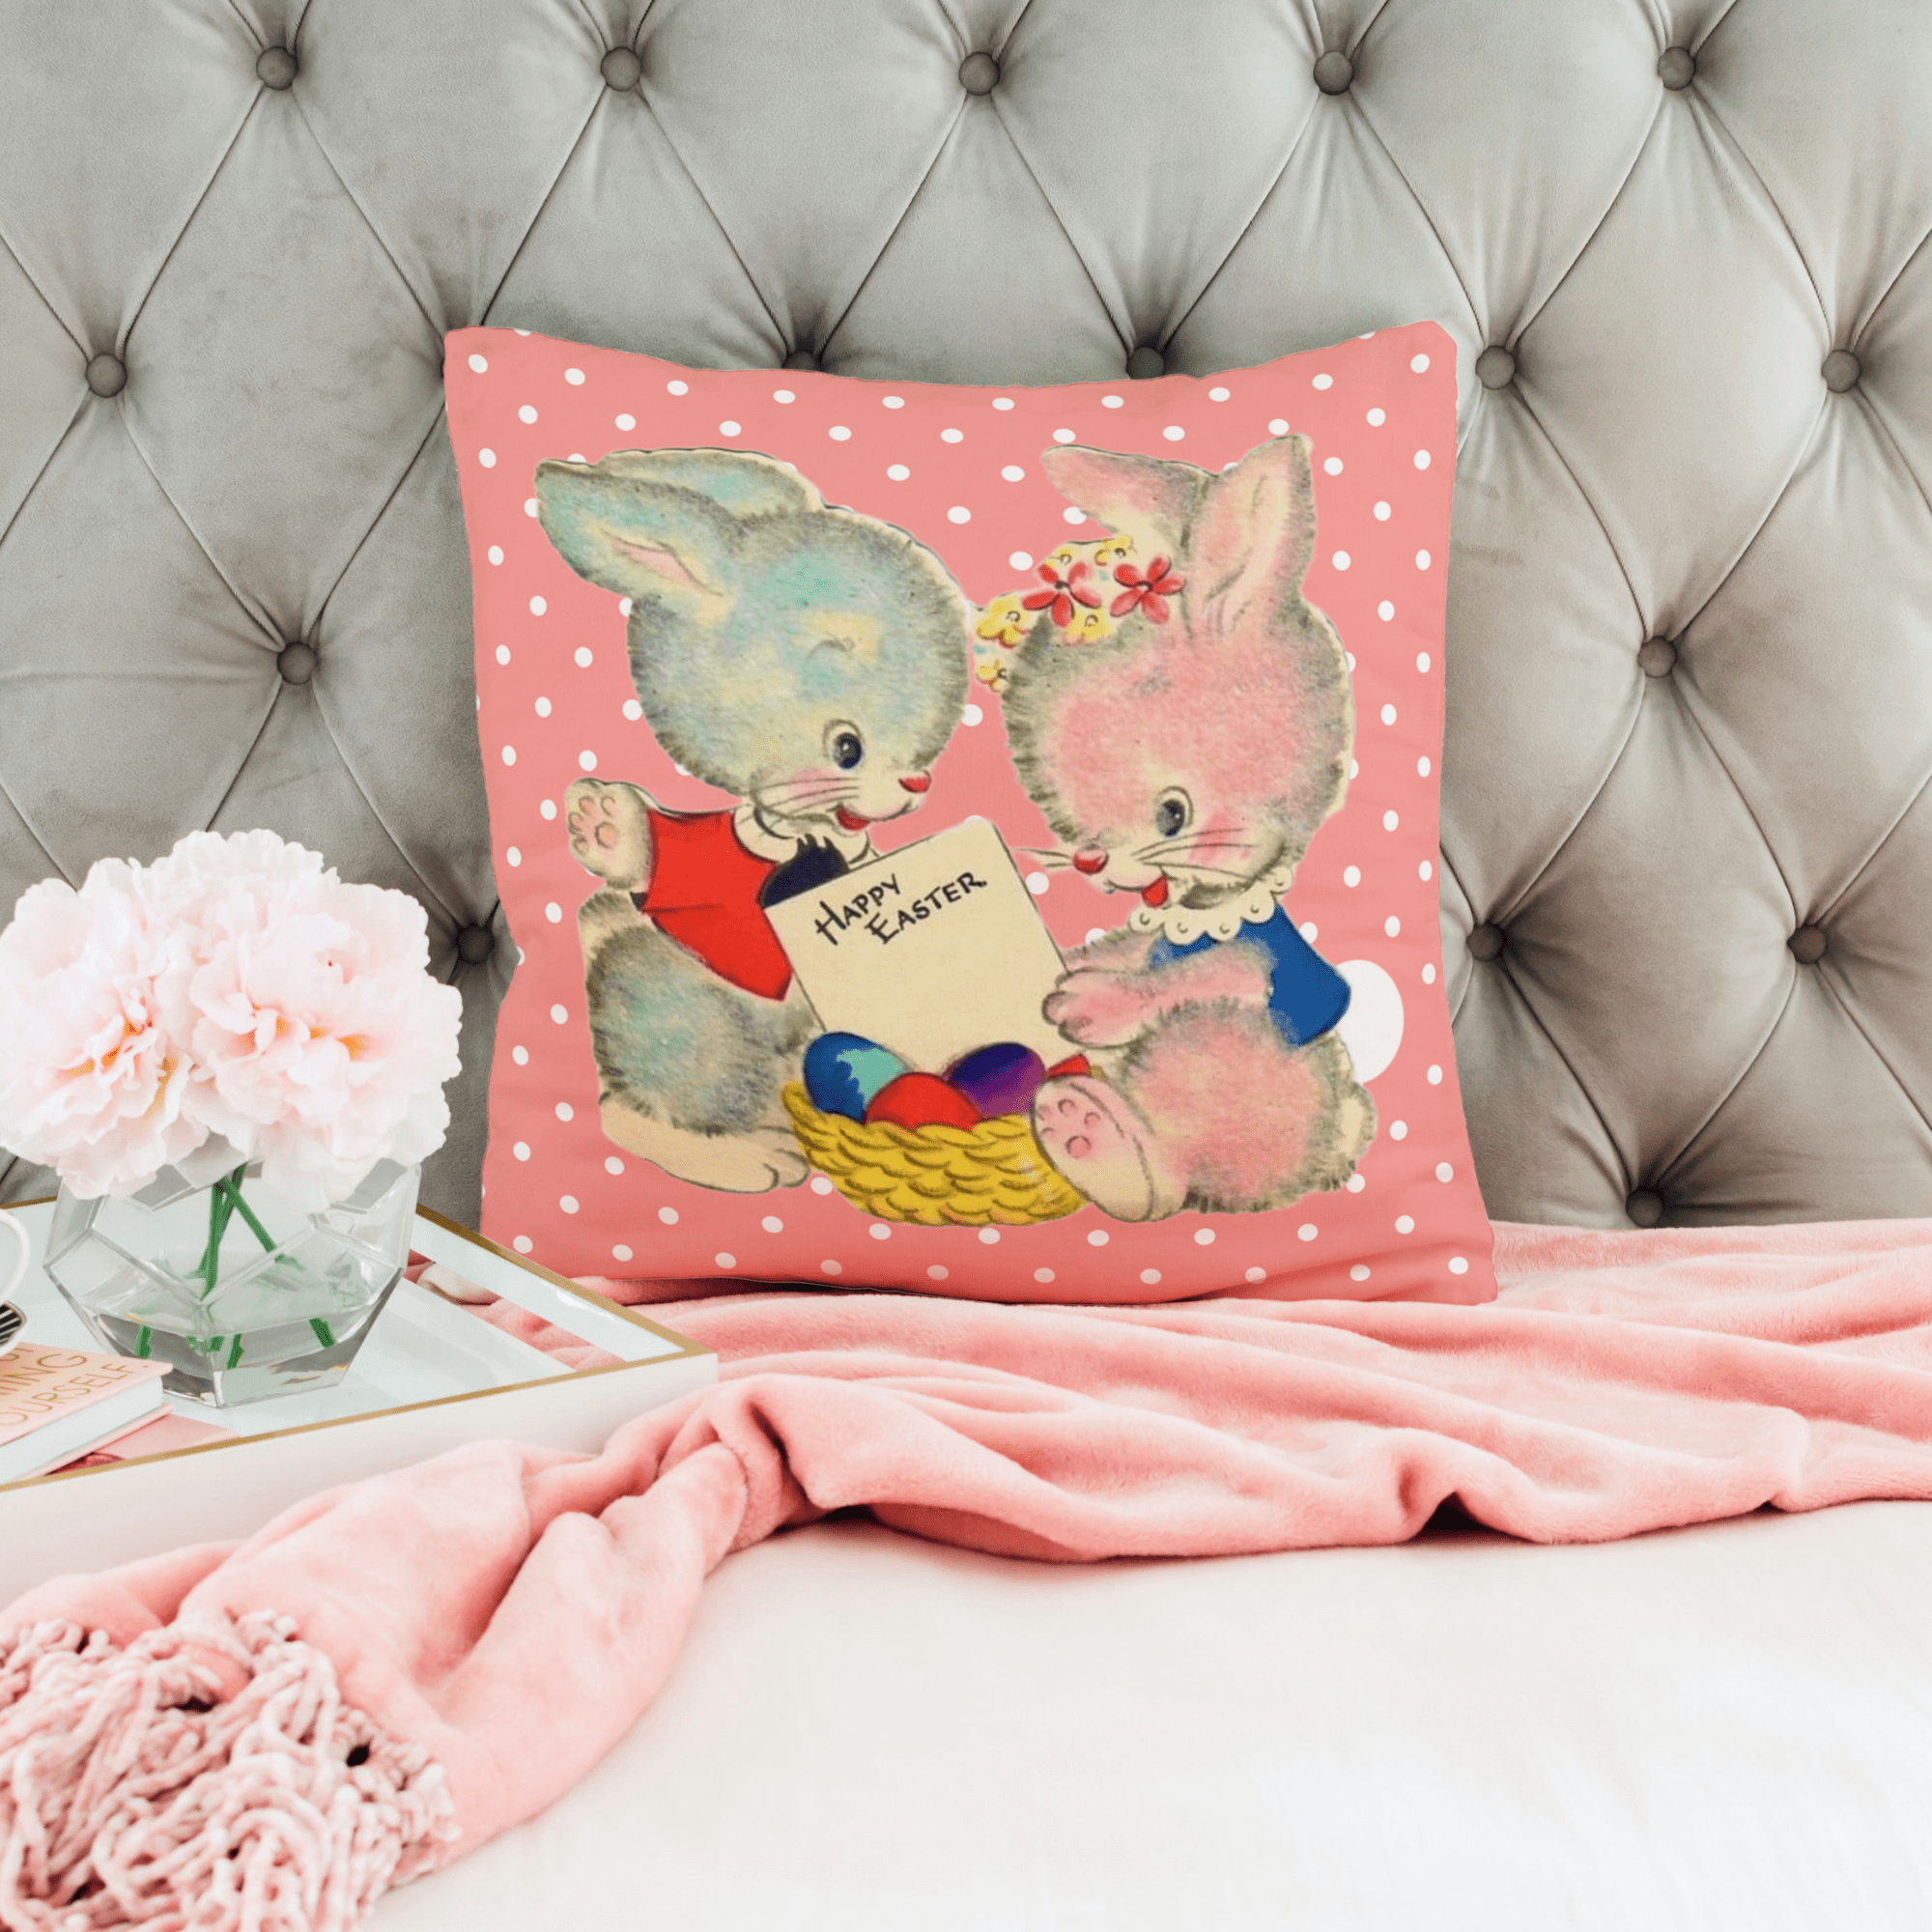 Vintage Easter Card Anthropomorphic Bunny Girl, Bunny Boy, Love, Happy Easter Retro Polka Dot Pink Easter Pillow And Insert Home Decor